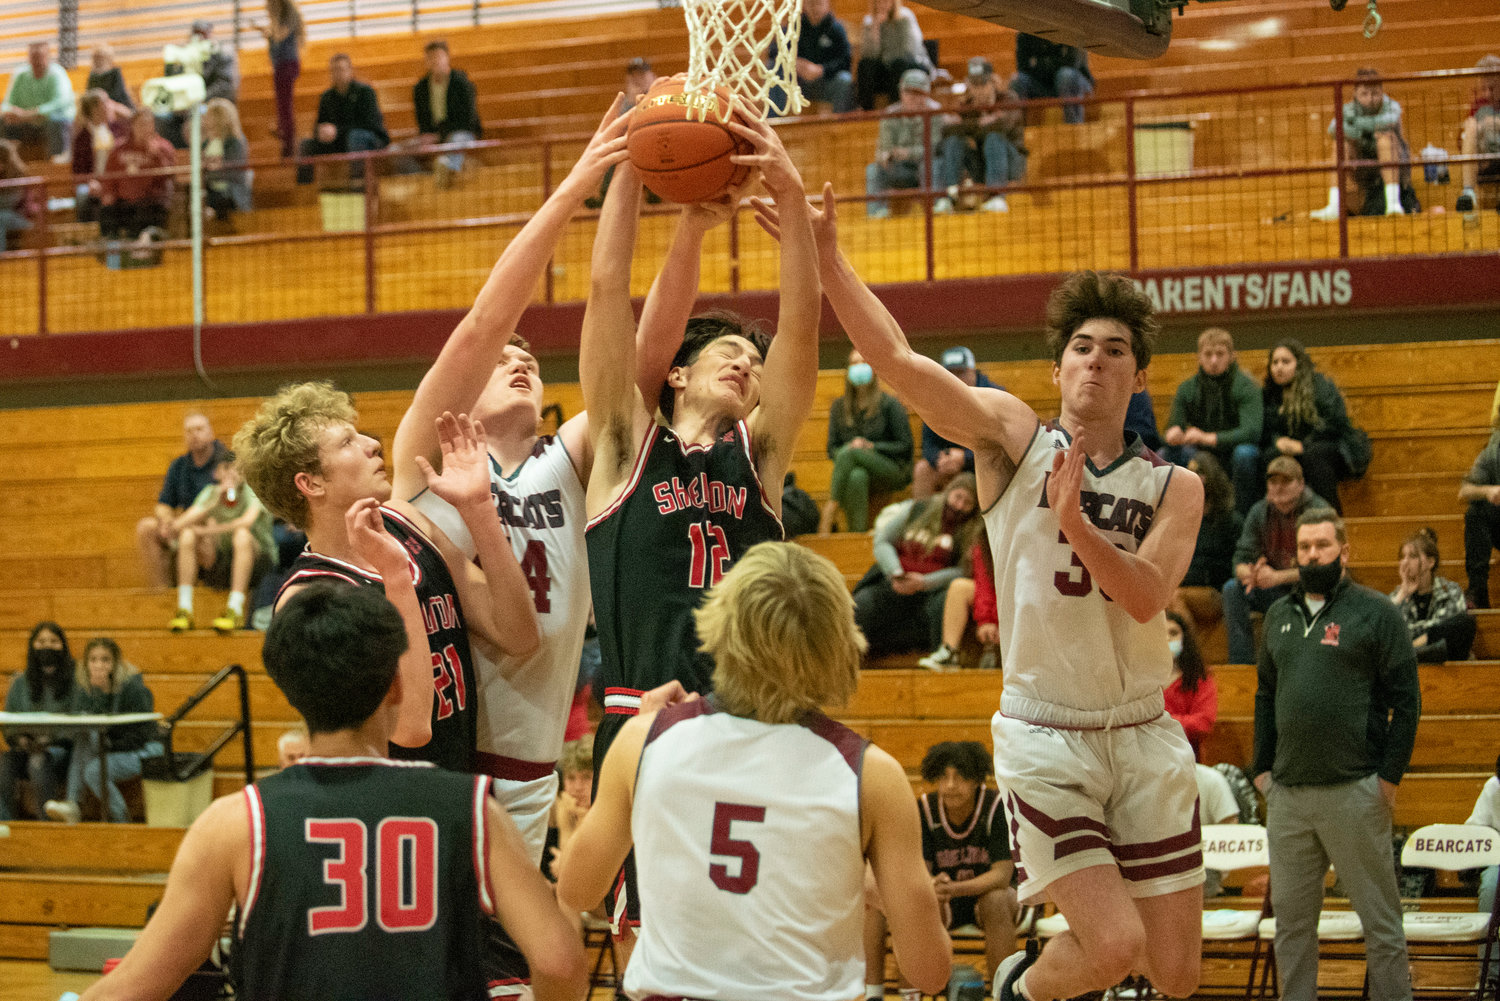 Shelton and W.F. West players battle for a rebound during a game in Chehalis on Dec. 8.